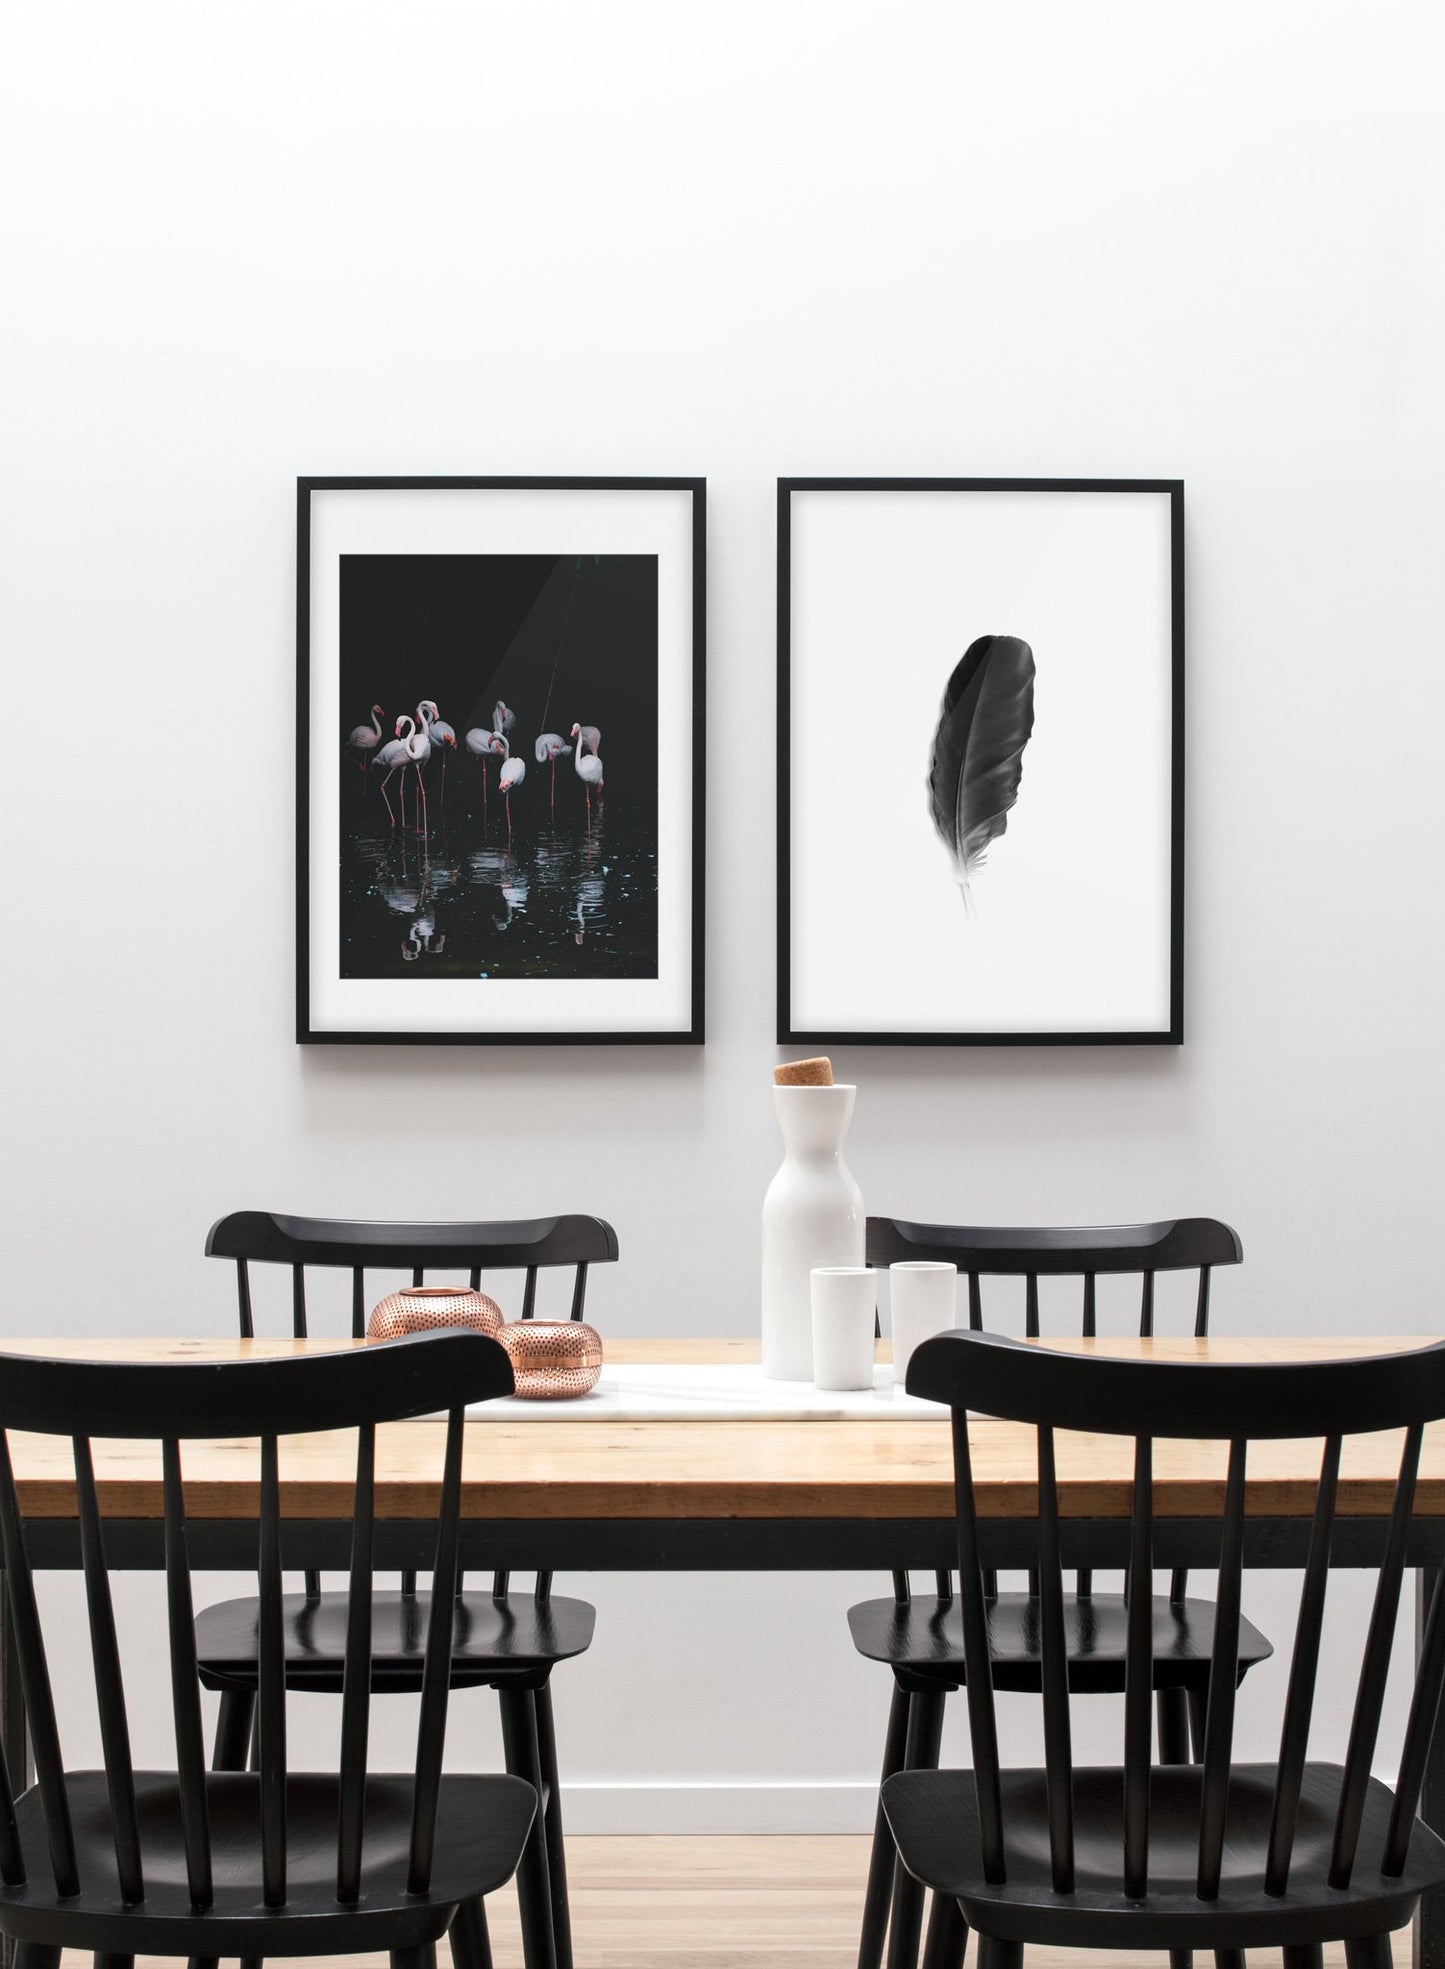 Modern minimalist poster by Opposite Wall with Flamingos - Gallery Wall Duo - Dining room